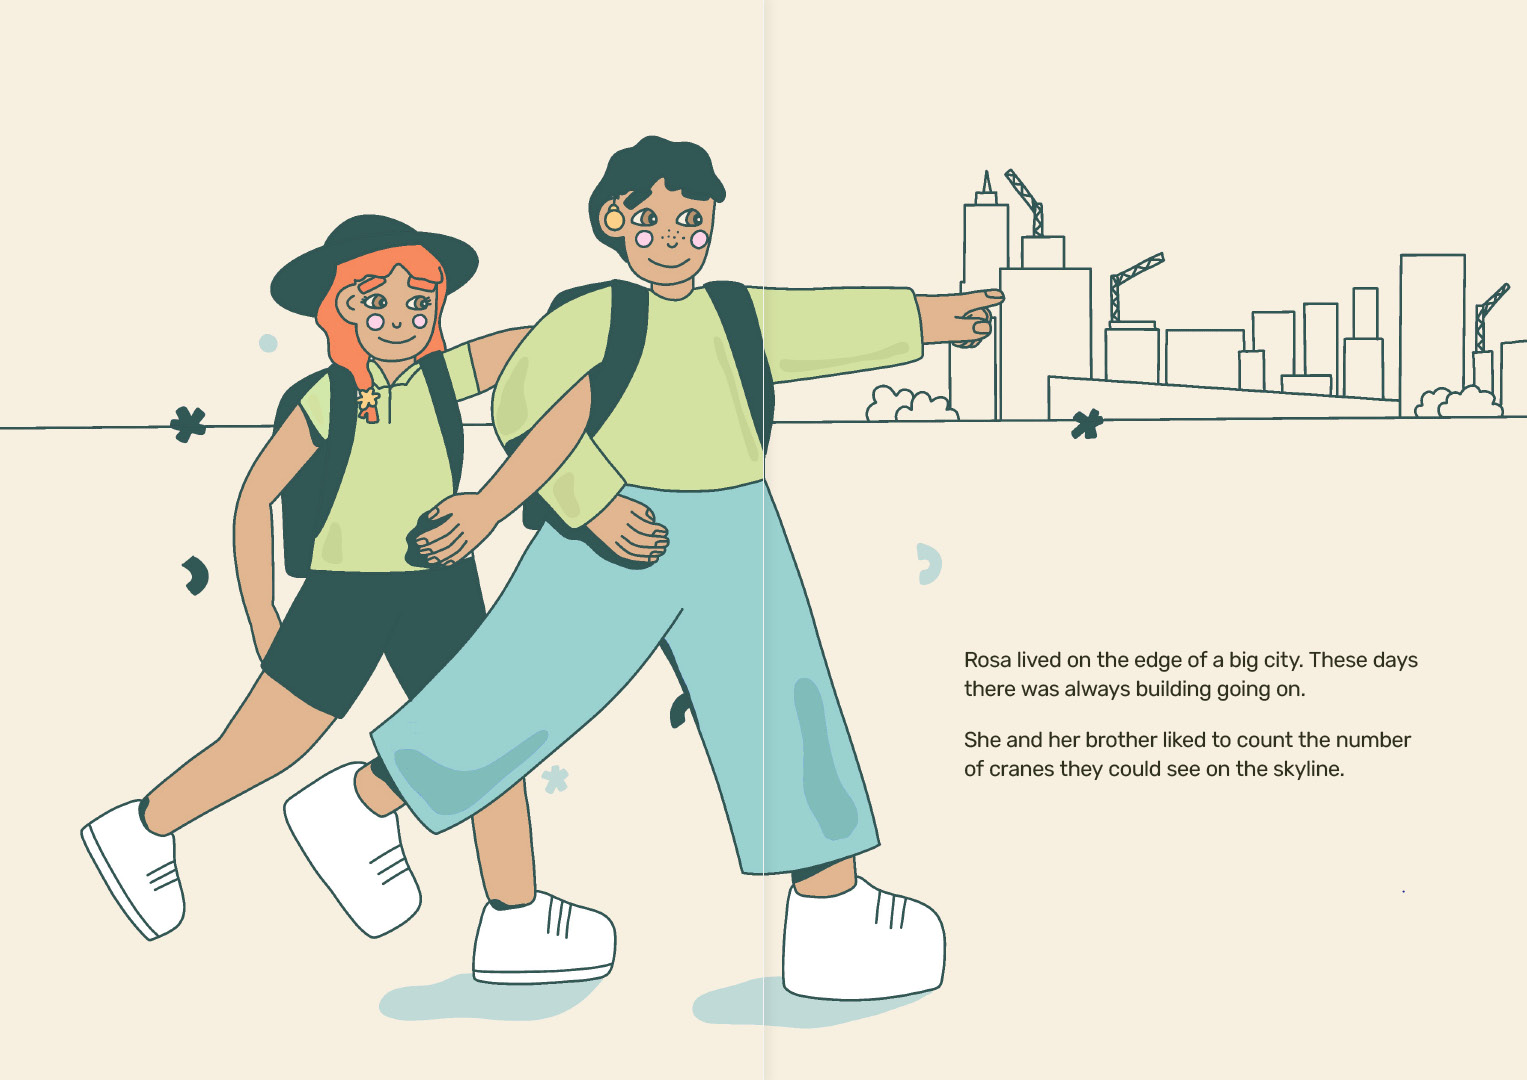 Illustrated spread from eReader picturing a brother and sister pointing to a city in the background.